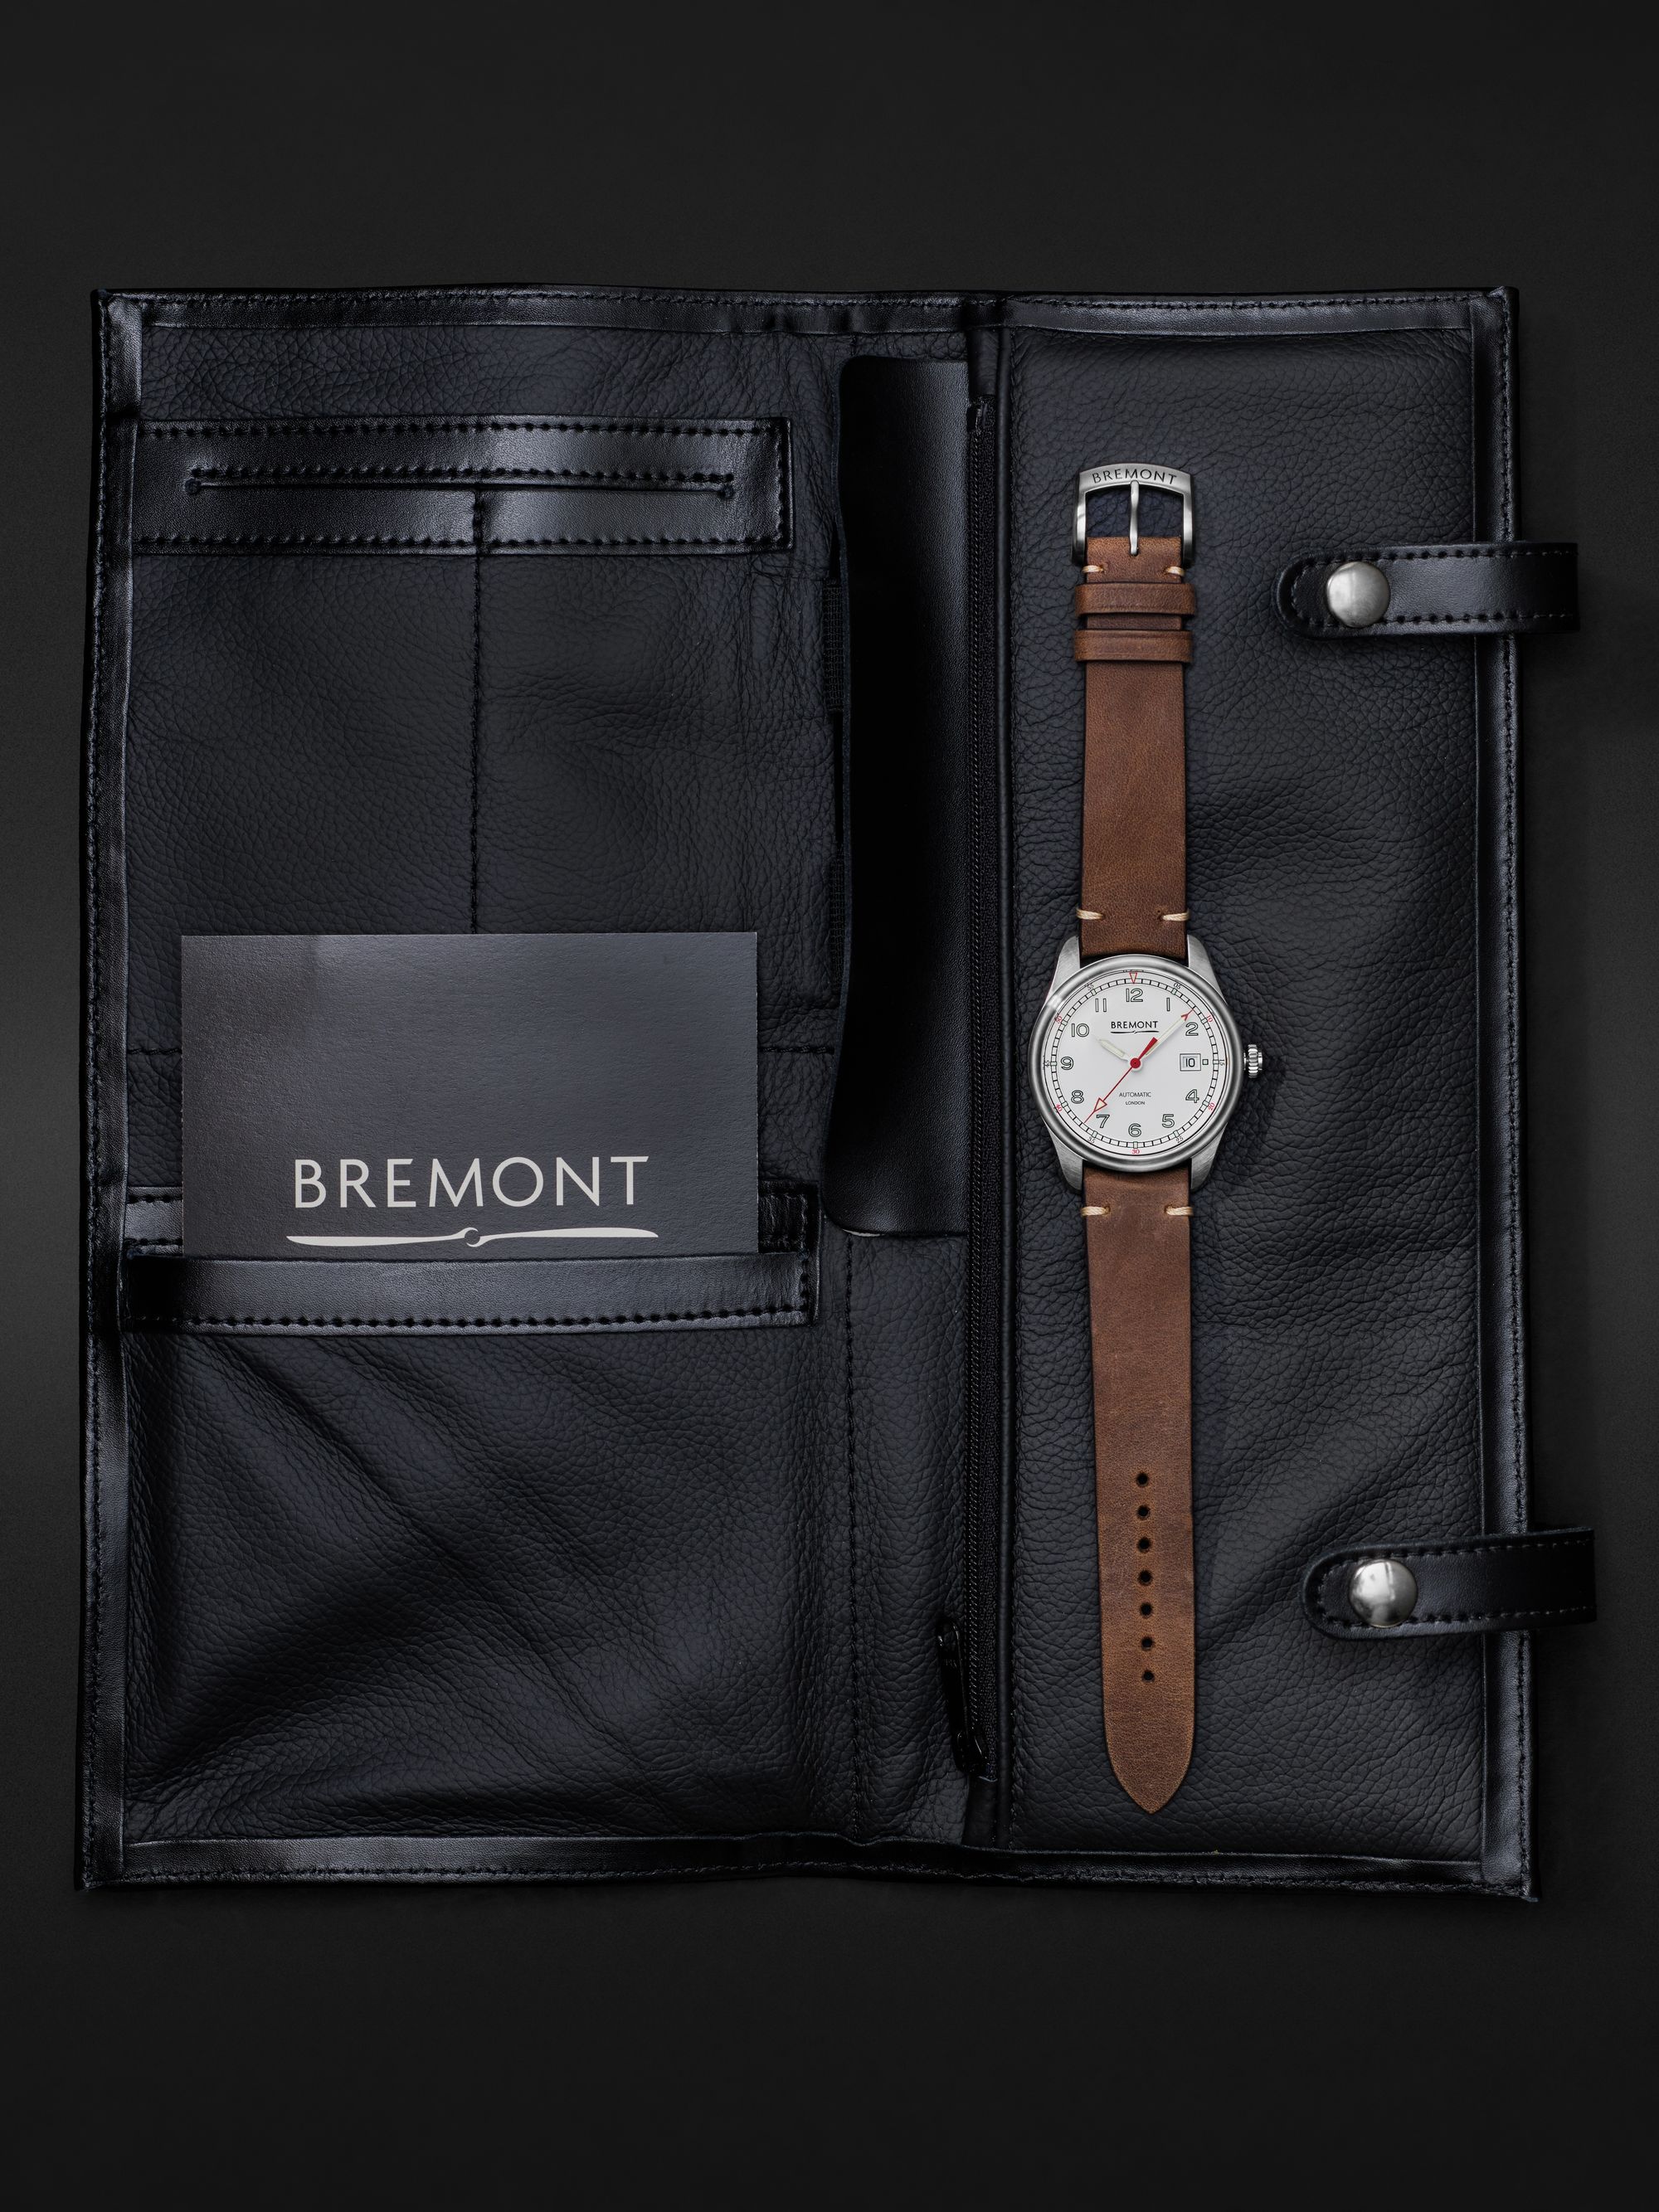 BREMONT Airco Mach 1 Black Automatic 40mm Stainless Steel and Leather Watch, Ref. AIRCO-M1-BK-R-S